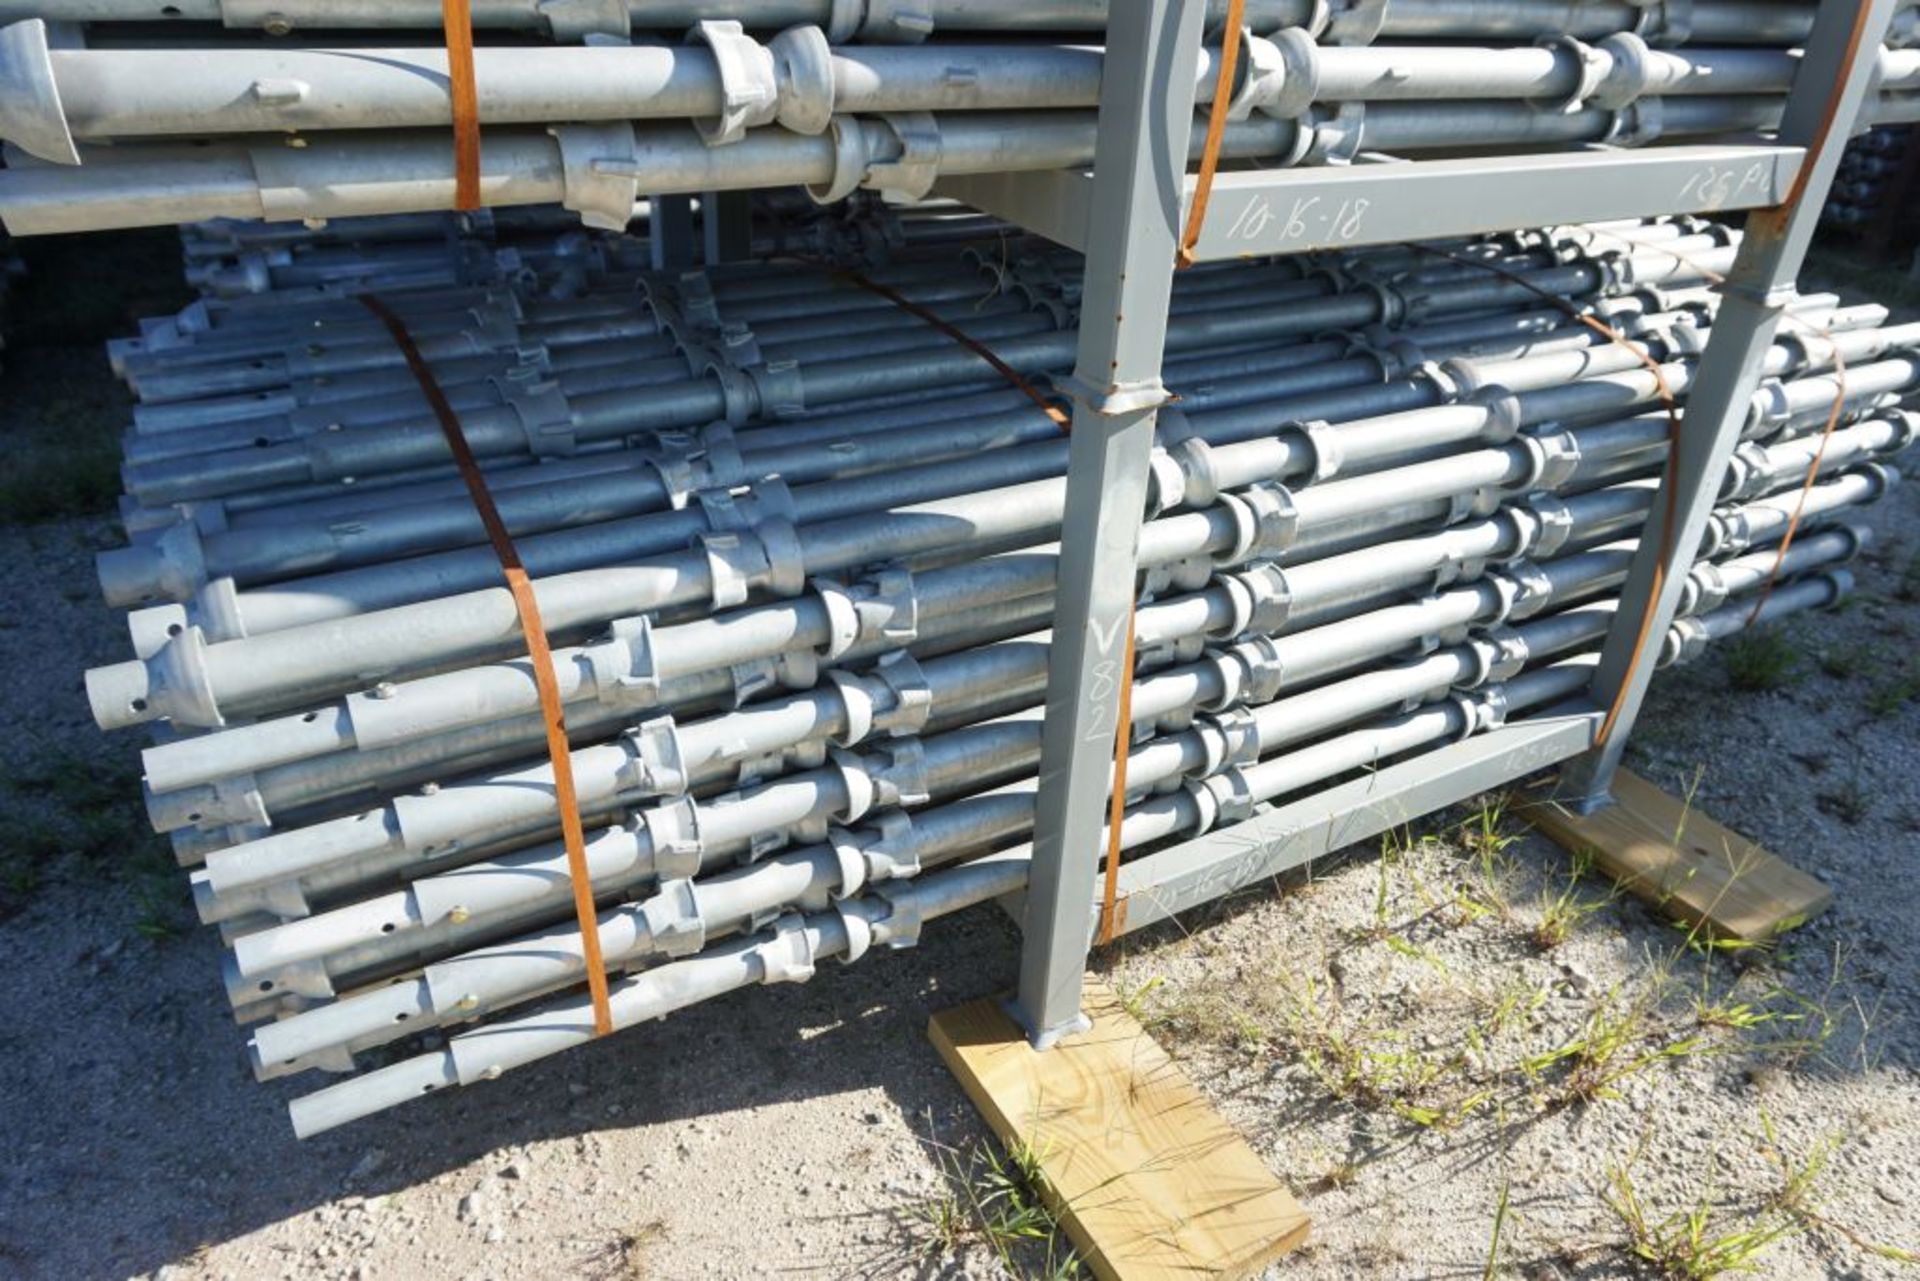 Lot of (250) 8' 2" (2.5M) Vertical 5 Cup; Type: CLV82 - (2) Racks Per Lot - Approximate Weight:7,850 - Image 4 of 10